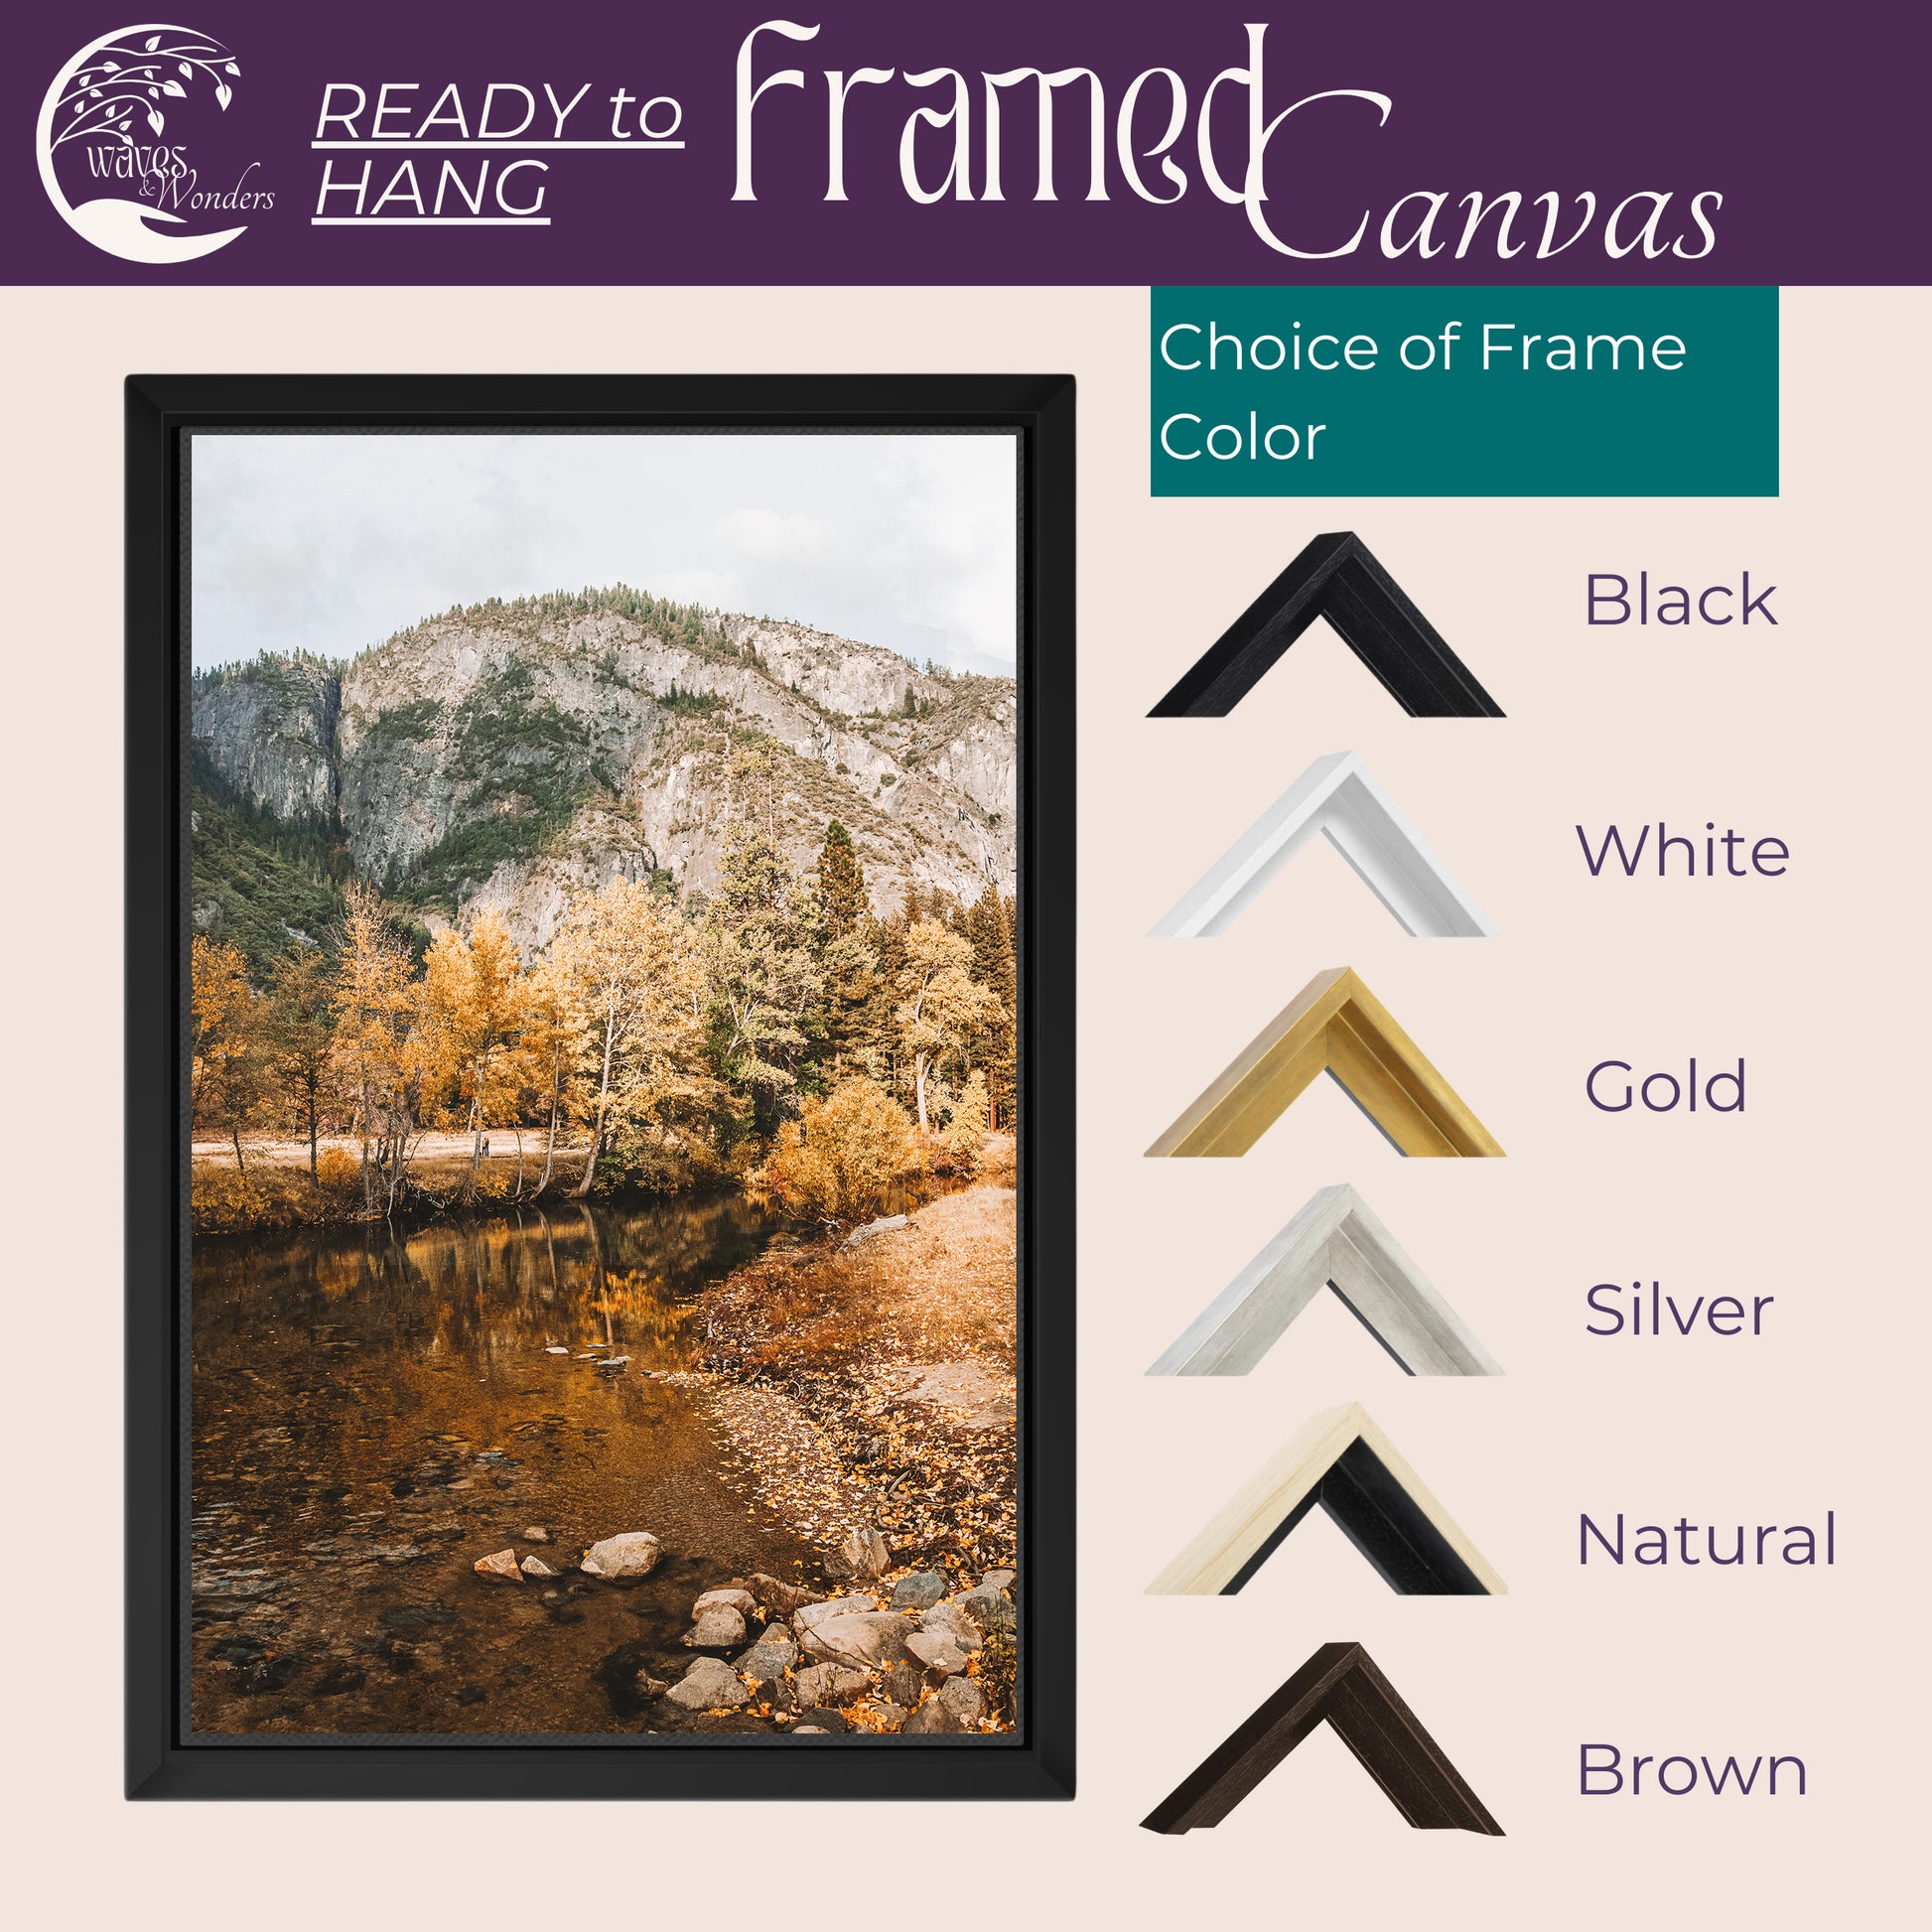 framed canvass with different colors and sizes